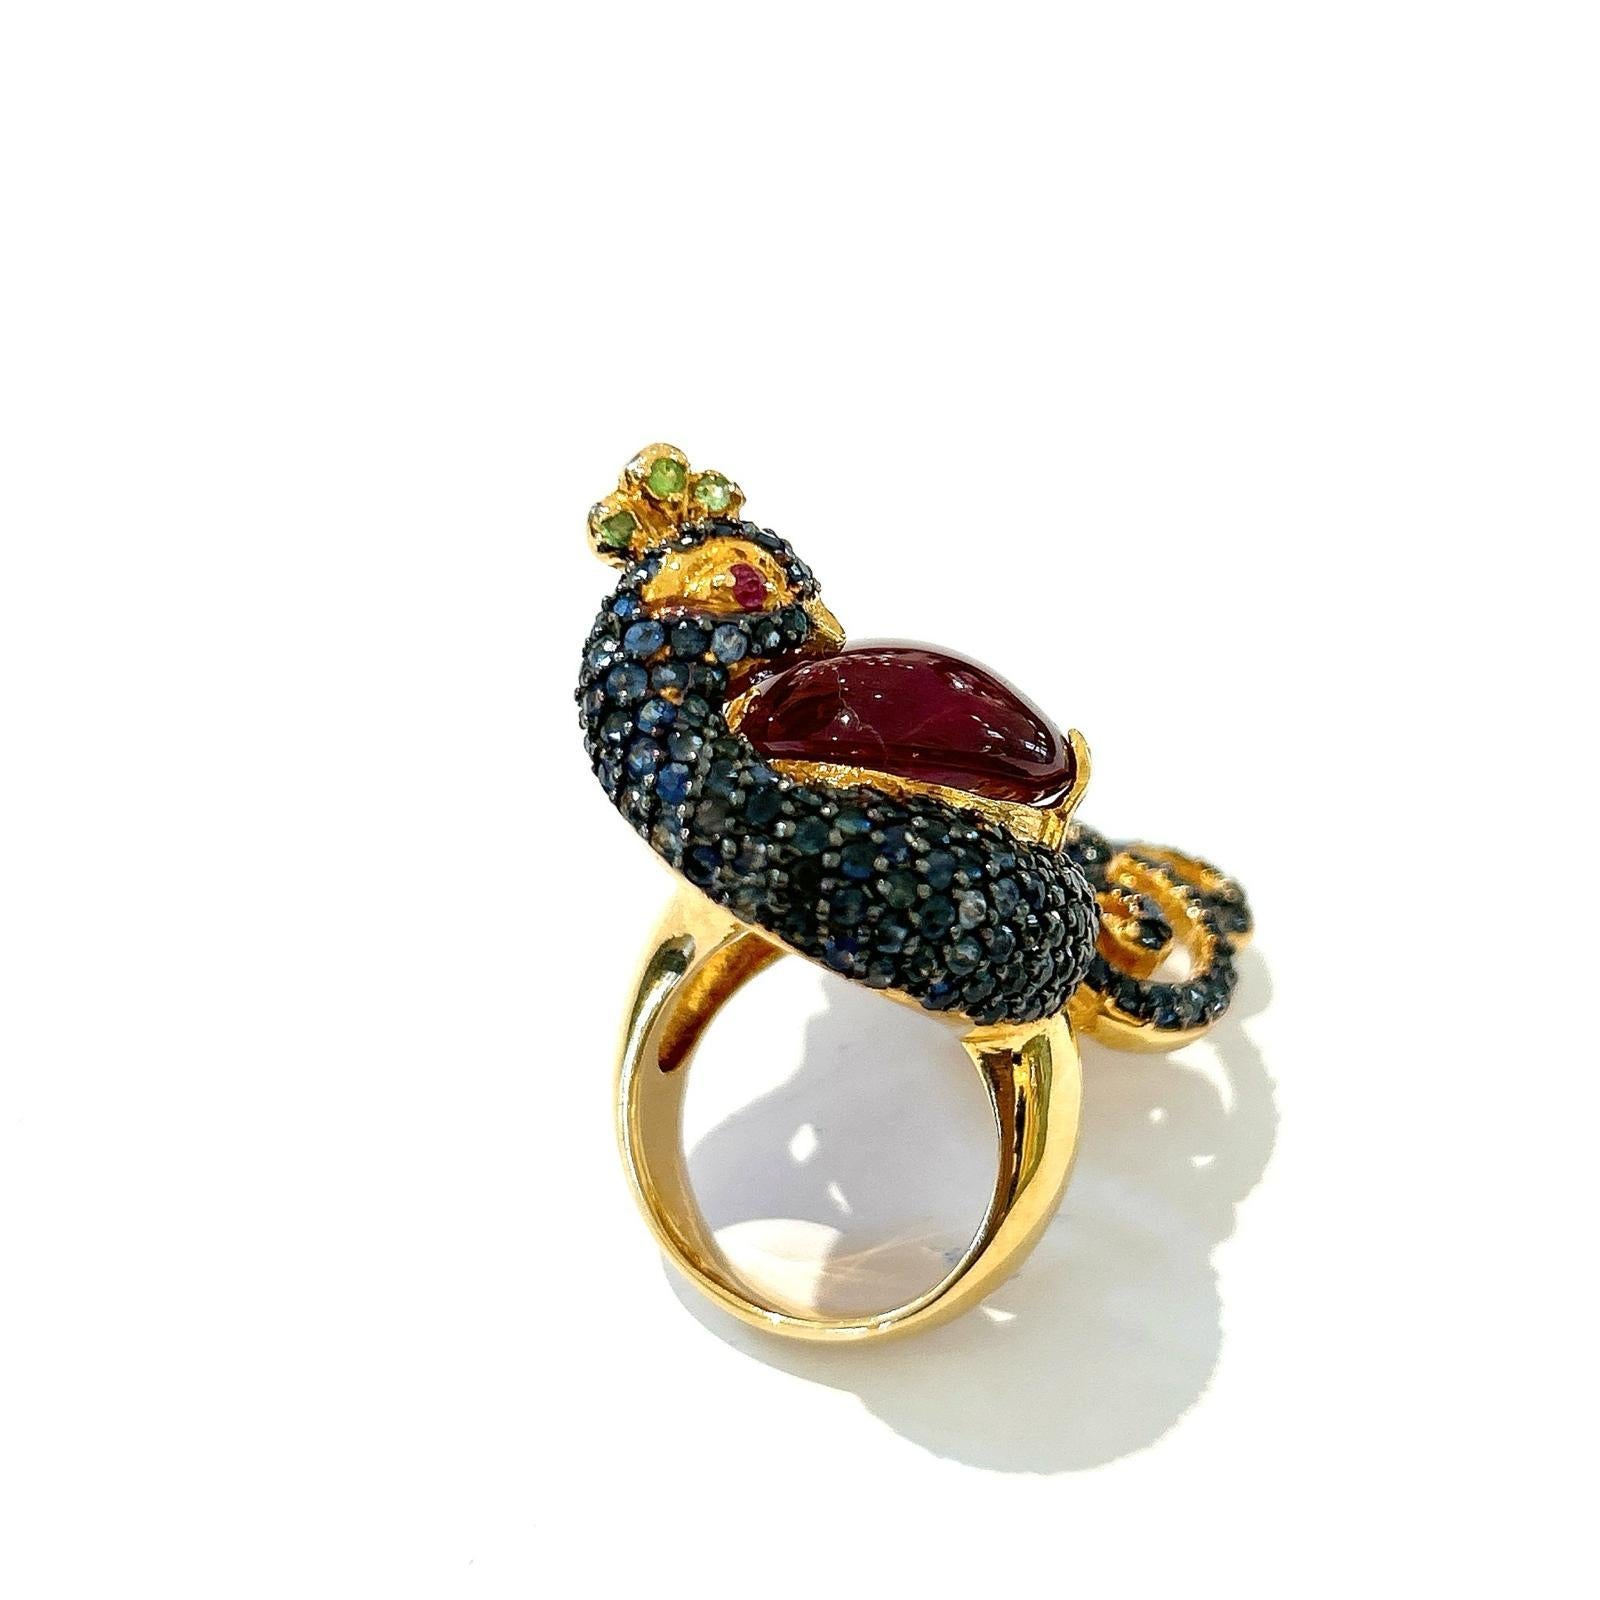 Bochic “Orient” Ruby & Sapphire Swan Cocktail Ring Set 18K & Silver  For Sale 5